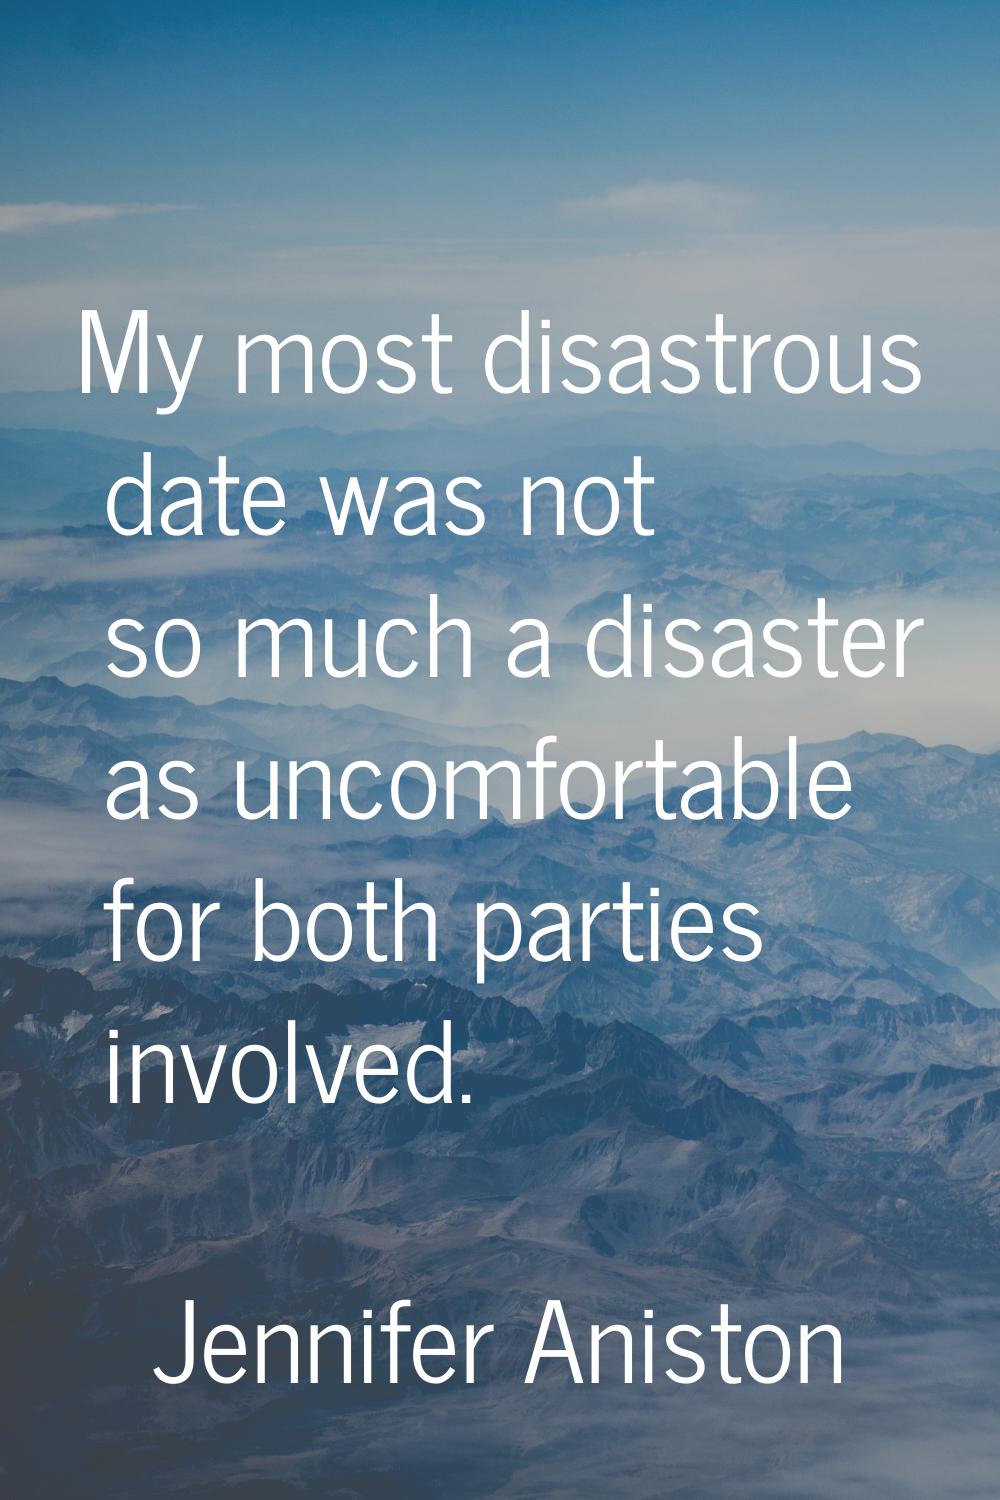 My most disastrous date was not so much a disaster as uncomfortable for both parties involved.